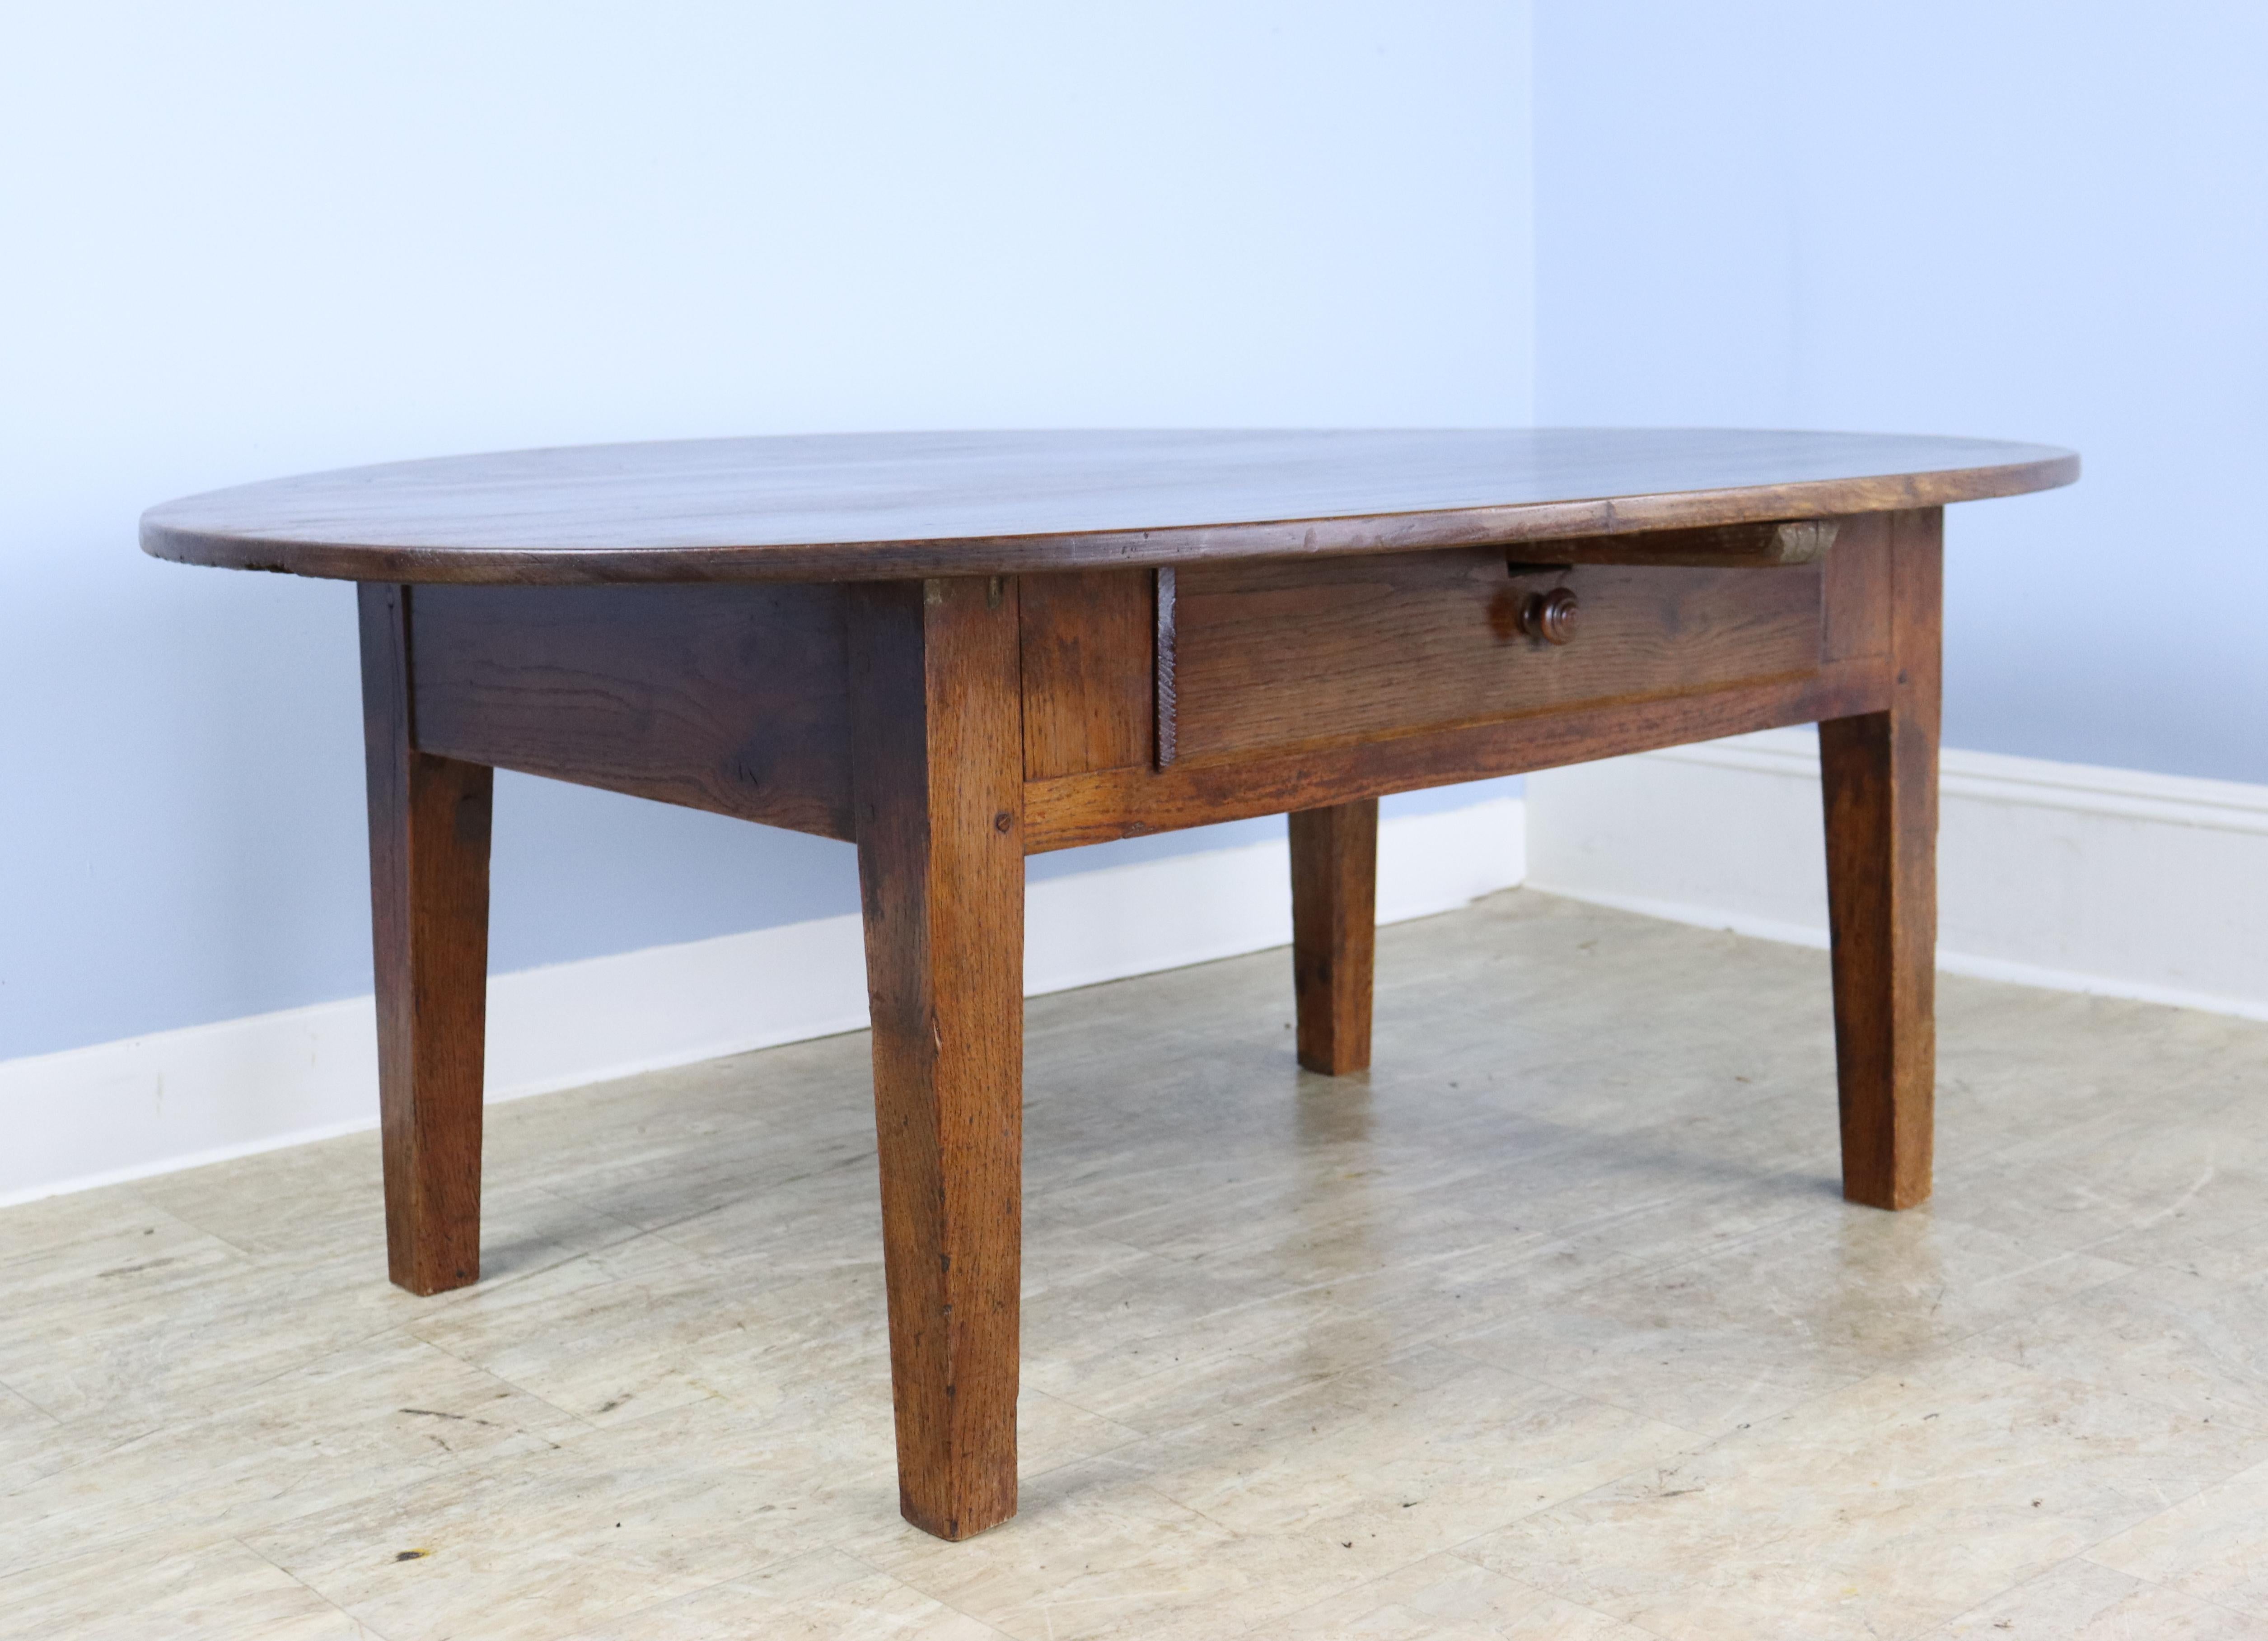 A simple, lustrous, and warmly toned oval chestnut coffee table from France. The top is large, well grained, and polished to a glow. very good chestnut grain. There is a small drawer in the apron.